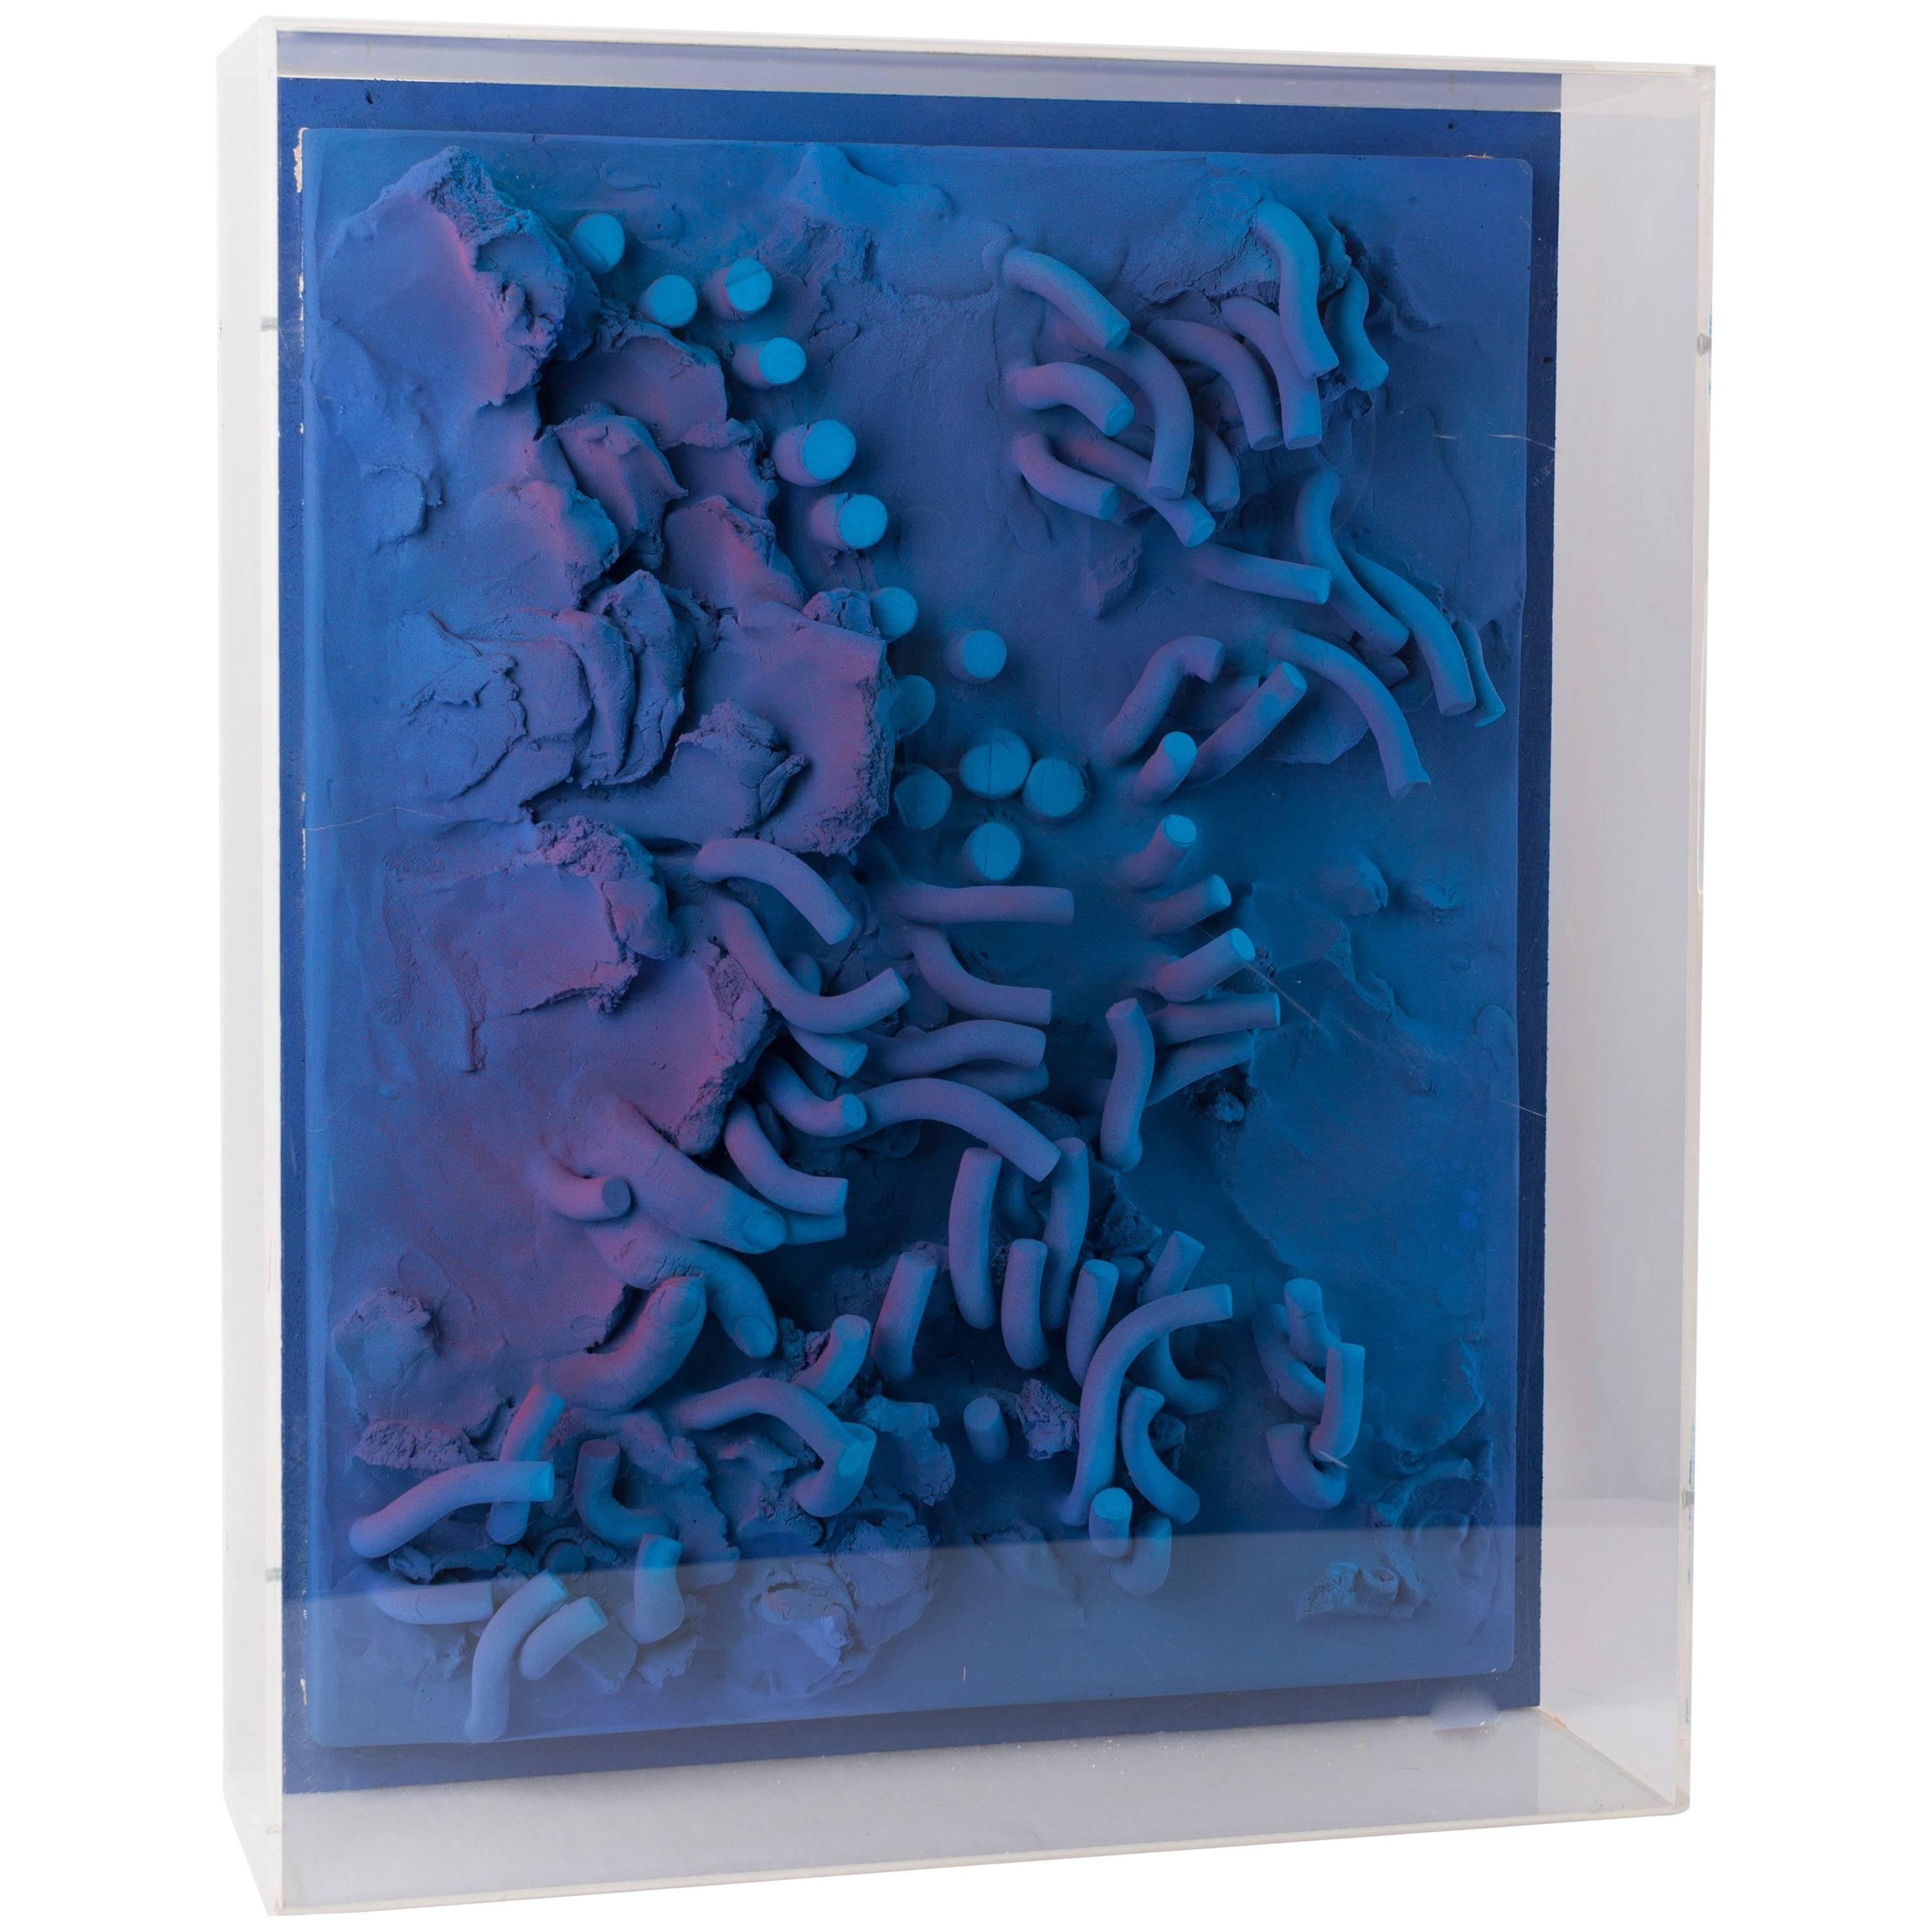 Wall Sculpture with Optical Art in Plexiglass created by César Bailleux For Sale